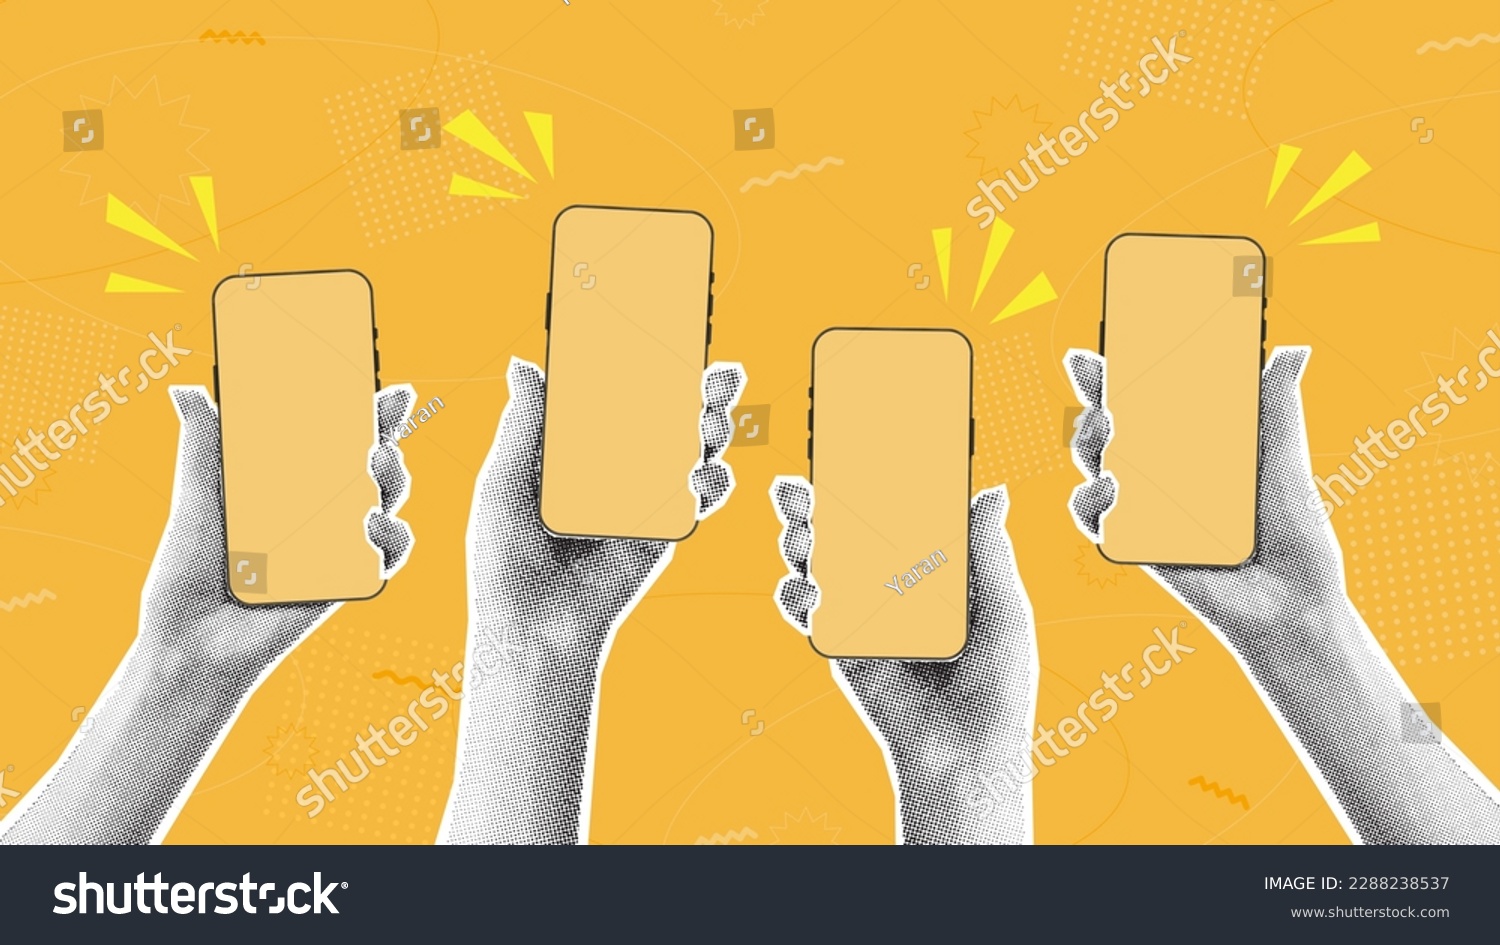 Halftone hands hold smartphones. Vector illustration with hands holding phones with halftone effects for decoration of retro banners and vintage postres. Collection of collage elements. #2288238537